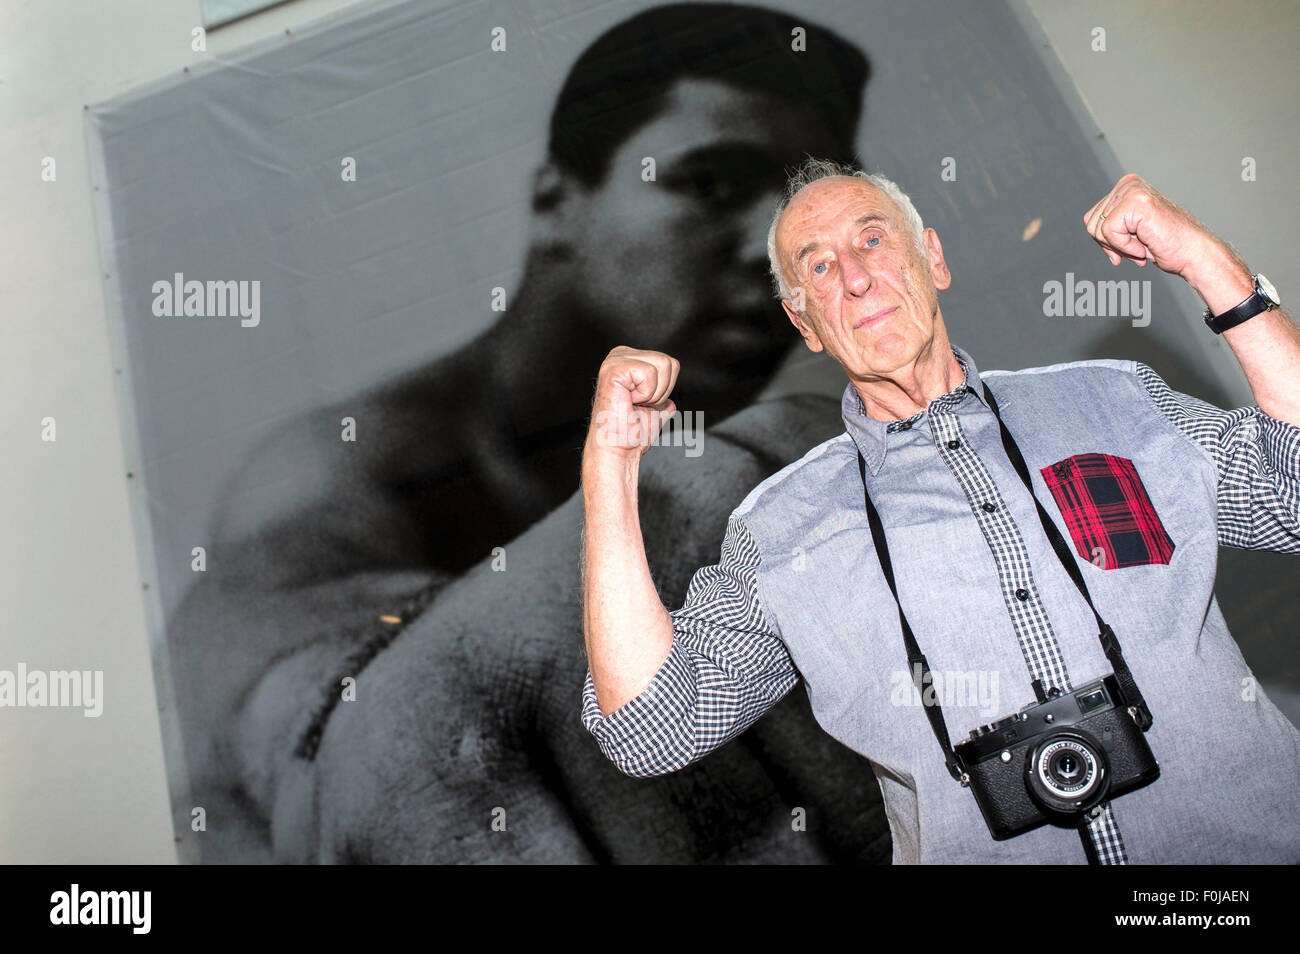 Berlin, Germany. 14th Aug, 2015. Thomas Höpker attends the 'Muhammad Ali' Exhibition Opening at Galerie Camera Work on August 14, 2015 in Berlin, Germany./picture alliance © dpa/Alamy Live News Stock Photo